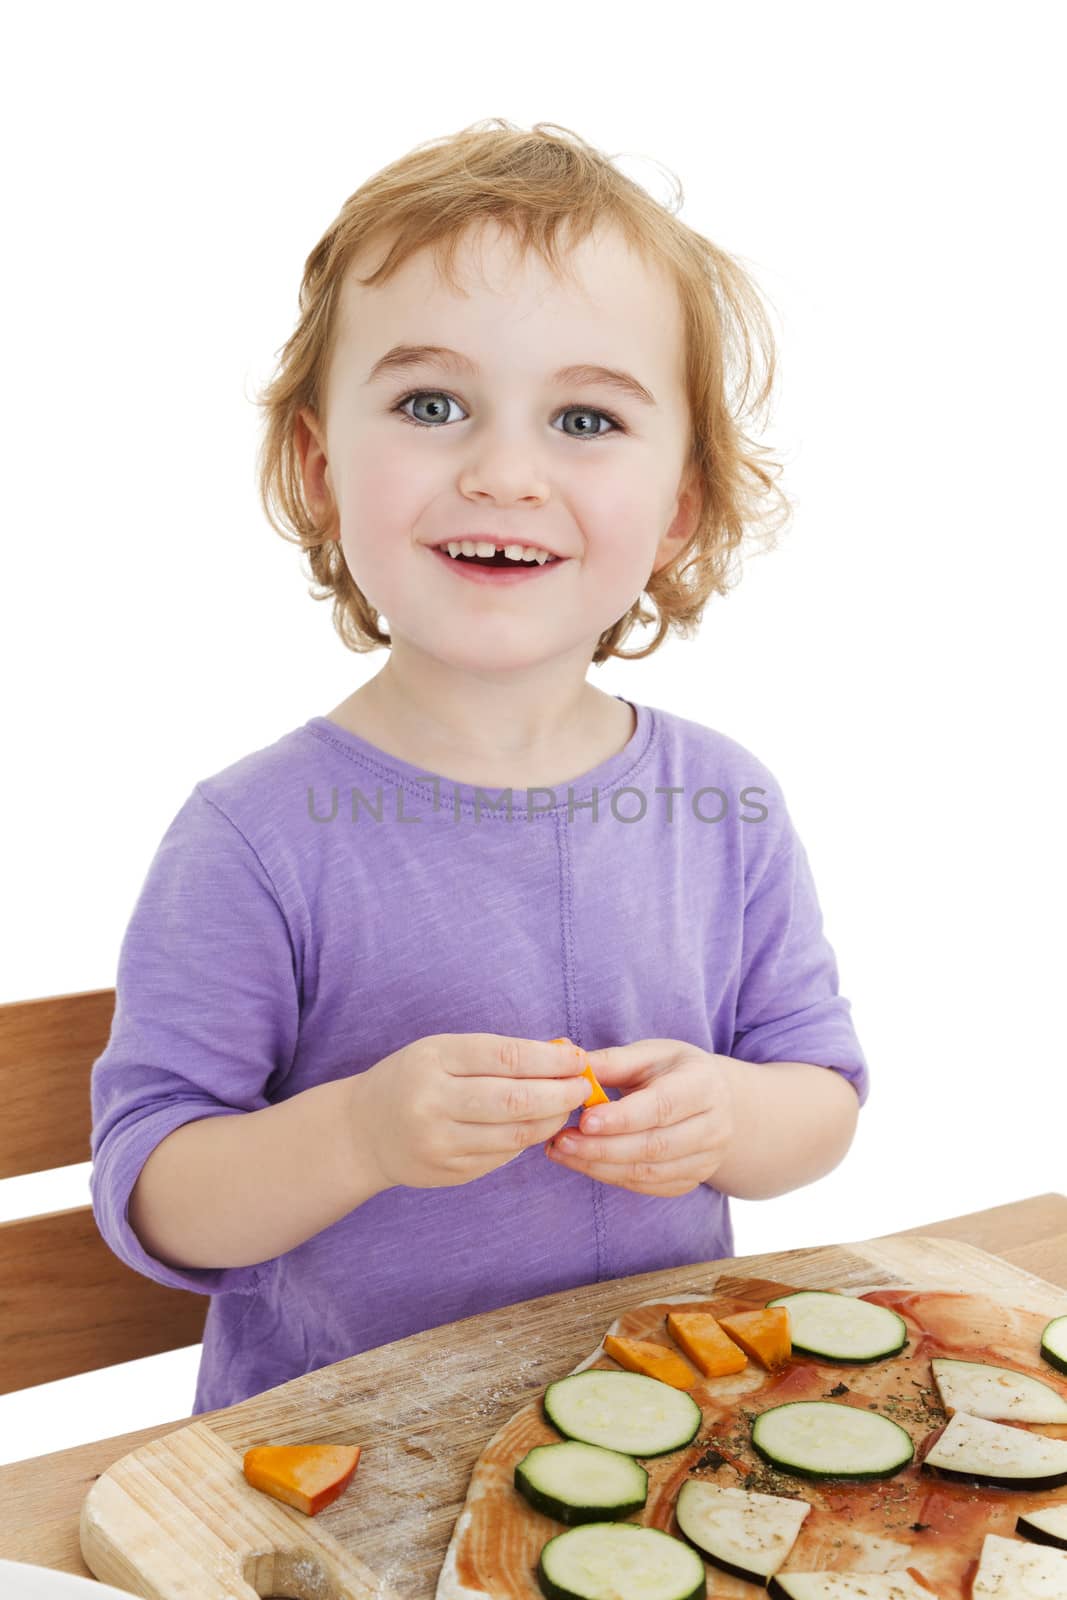 cute laughing girl making pizza. isolated in white background